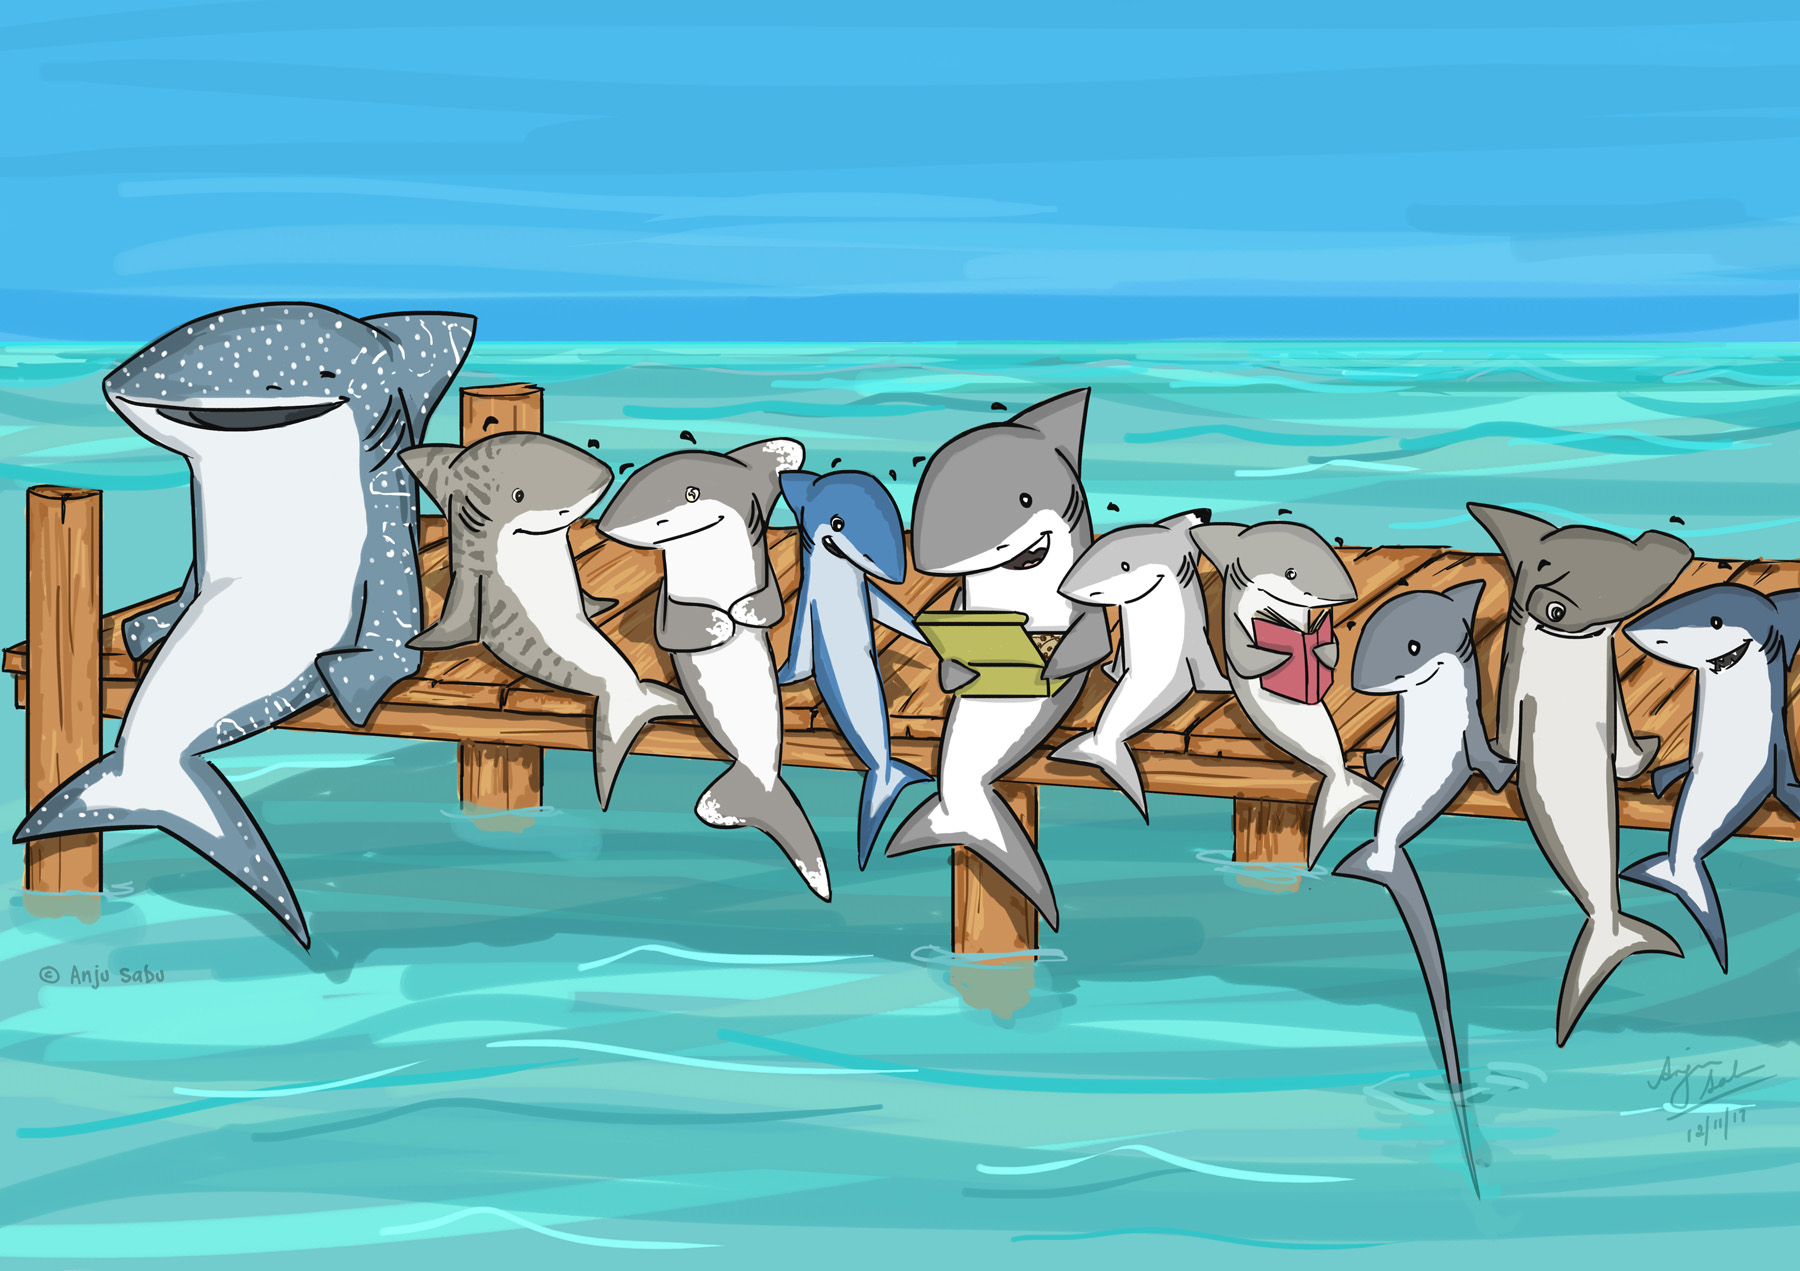 Sharks chilling at a dock, one of the many cartoons created by Anju Sabu